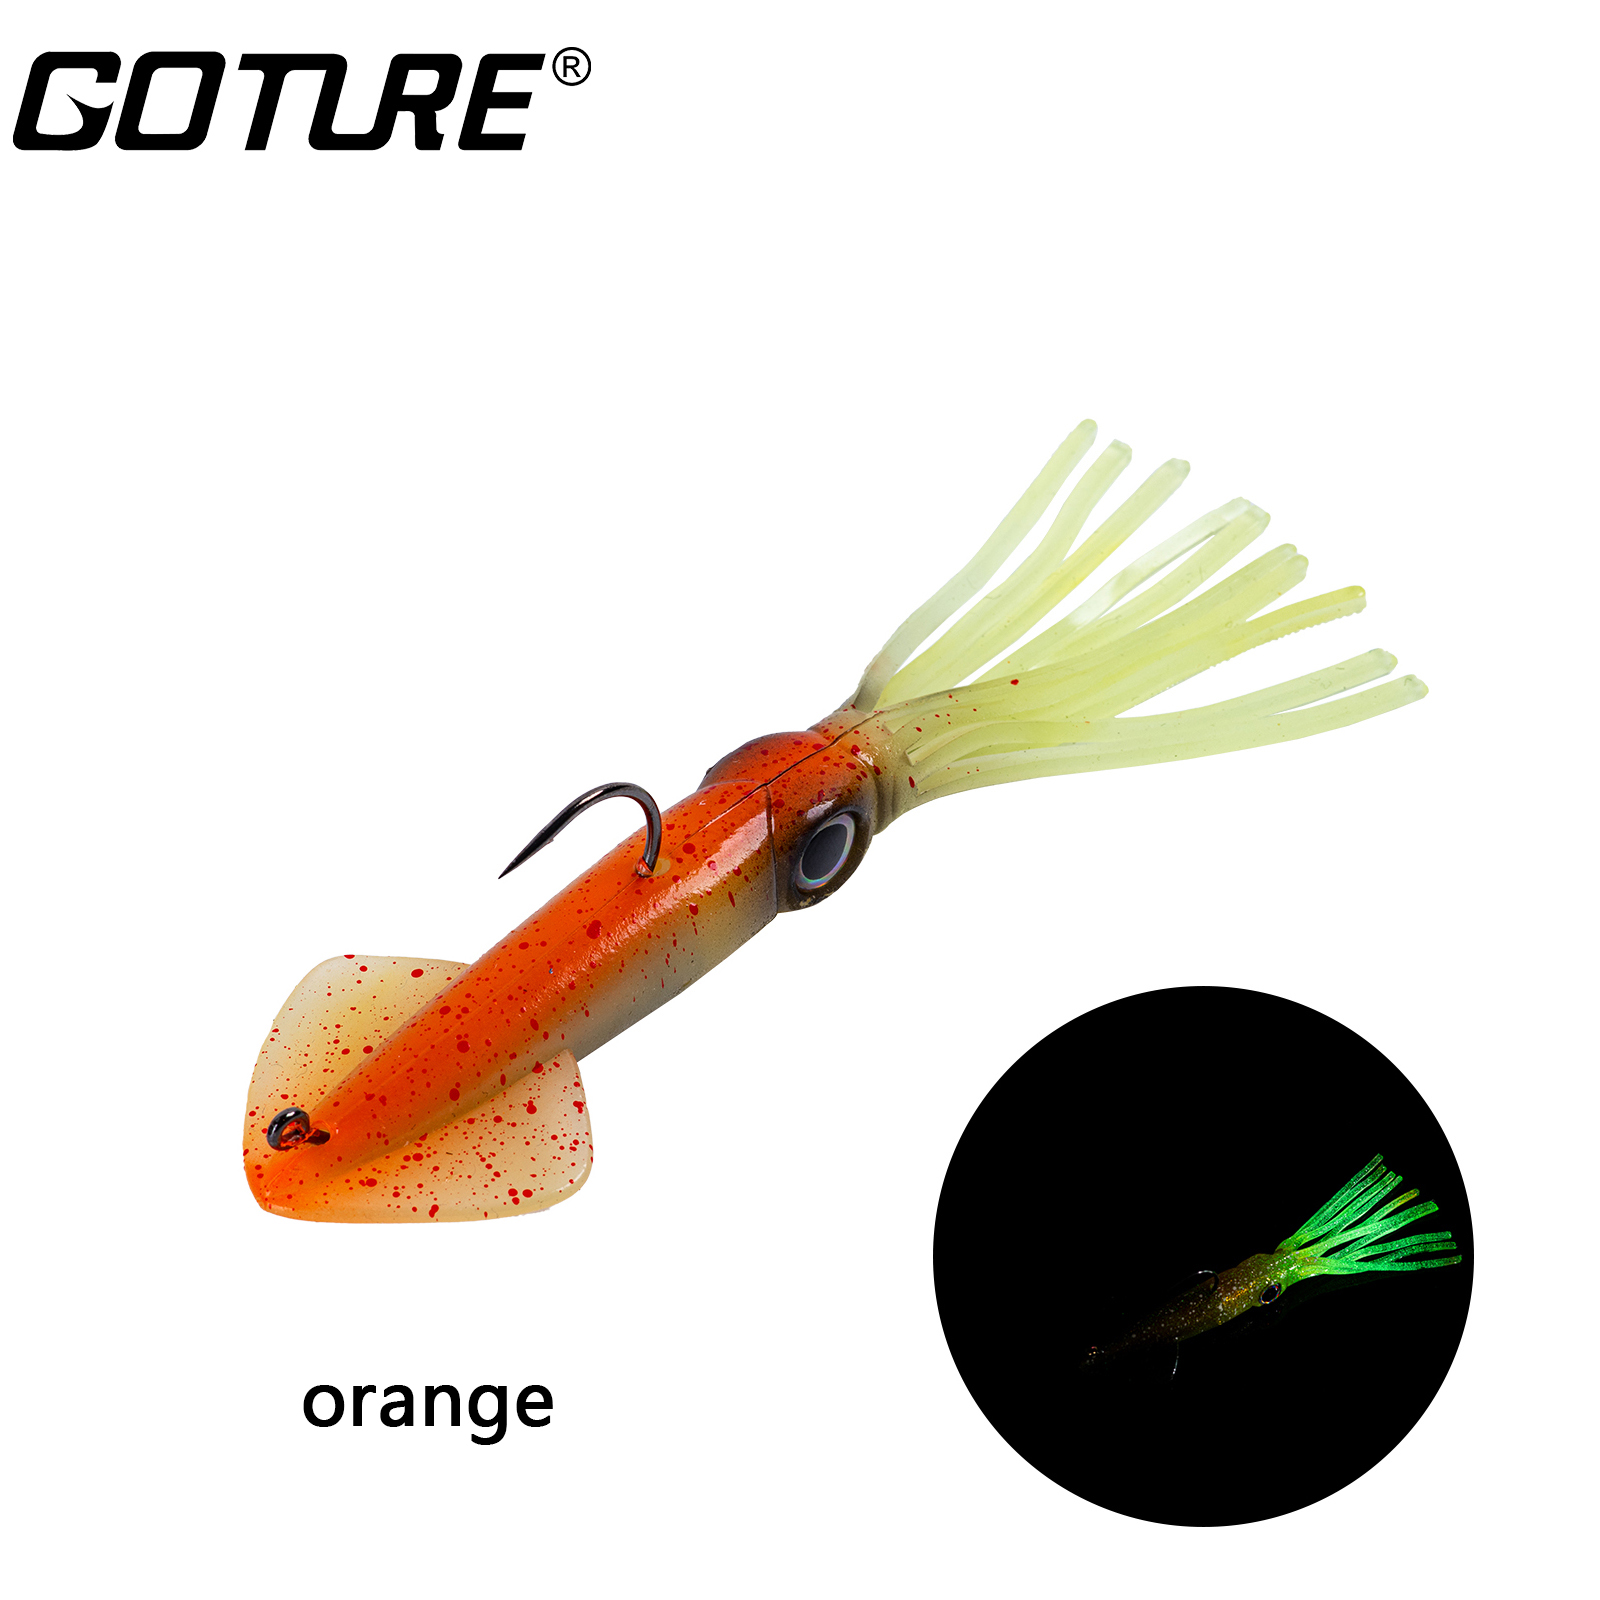  OROOTL Glow Squid Jigs Saltwater Fishing Lures Luminous Squid  Jig Hooks Kit Fluorescent Fishing Cuttlefish Sleeve Jig Octopus Lures Hard  Fishing Baits Set with Tackle Box 10pcs : Sports 